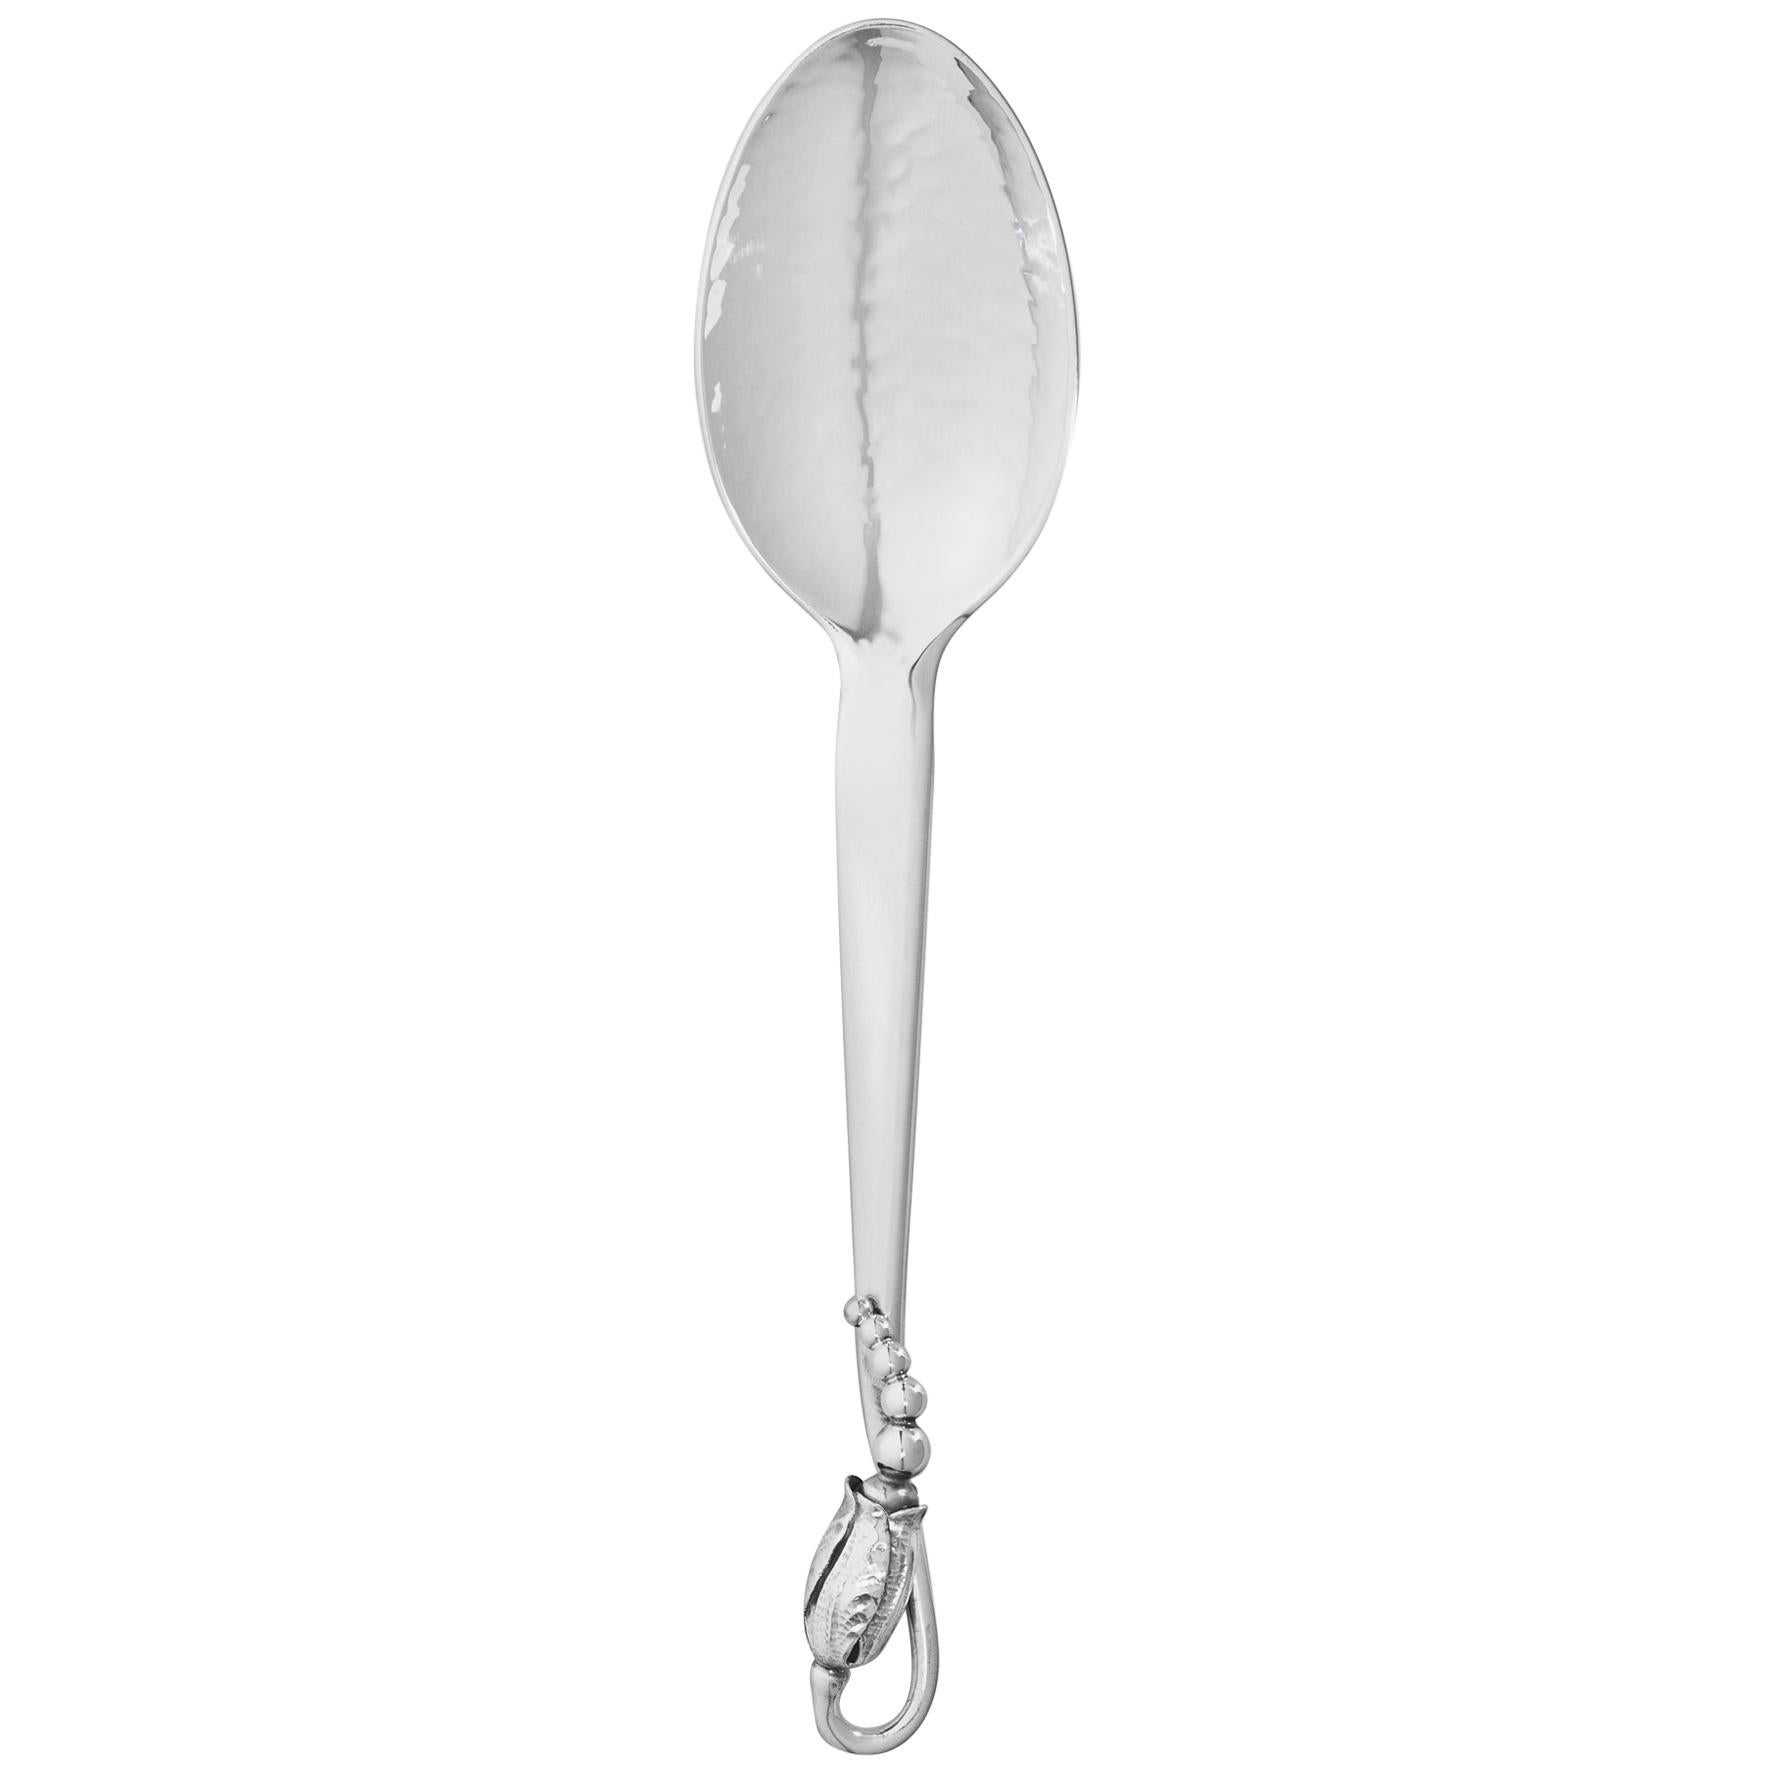 Georg Jensen Handcrafted Sterling Silver Blossom Child's Teaspoon